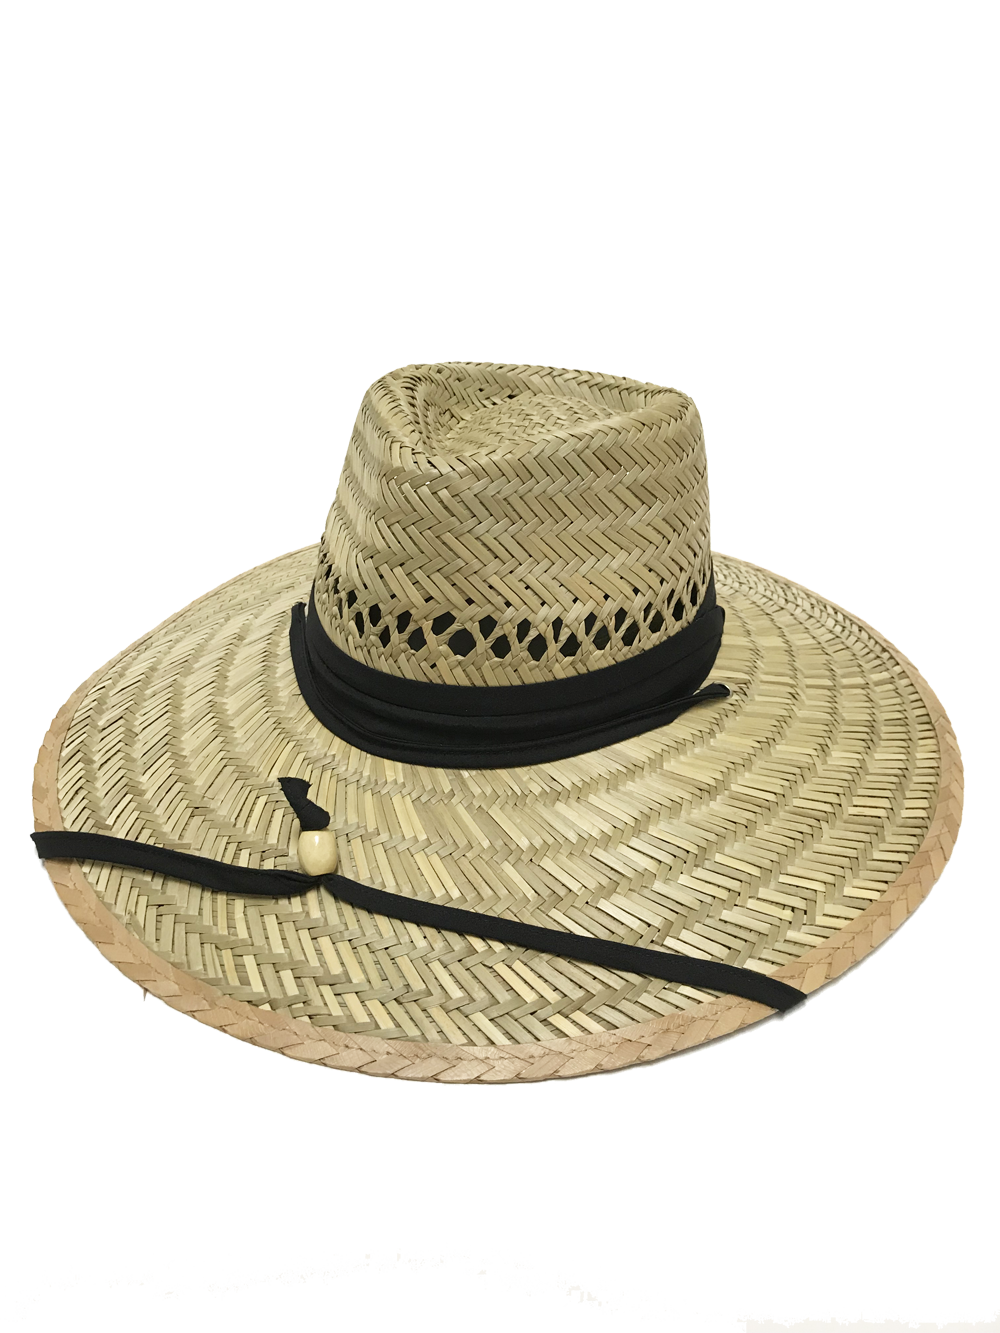 MEN'S RUSH STRAW BEACH HAT WITH SOLID FABRIC BAND AND CHIN STRAP